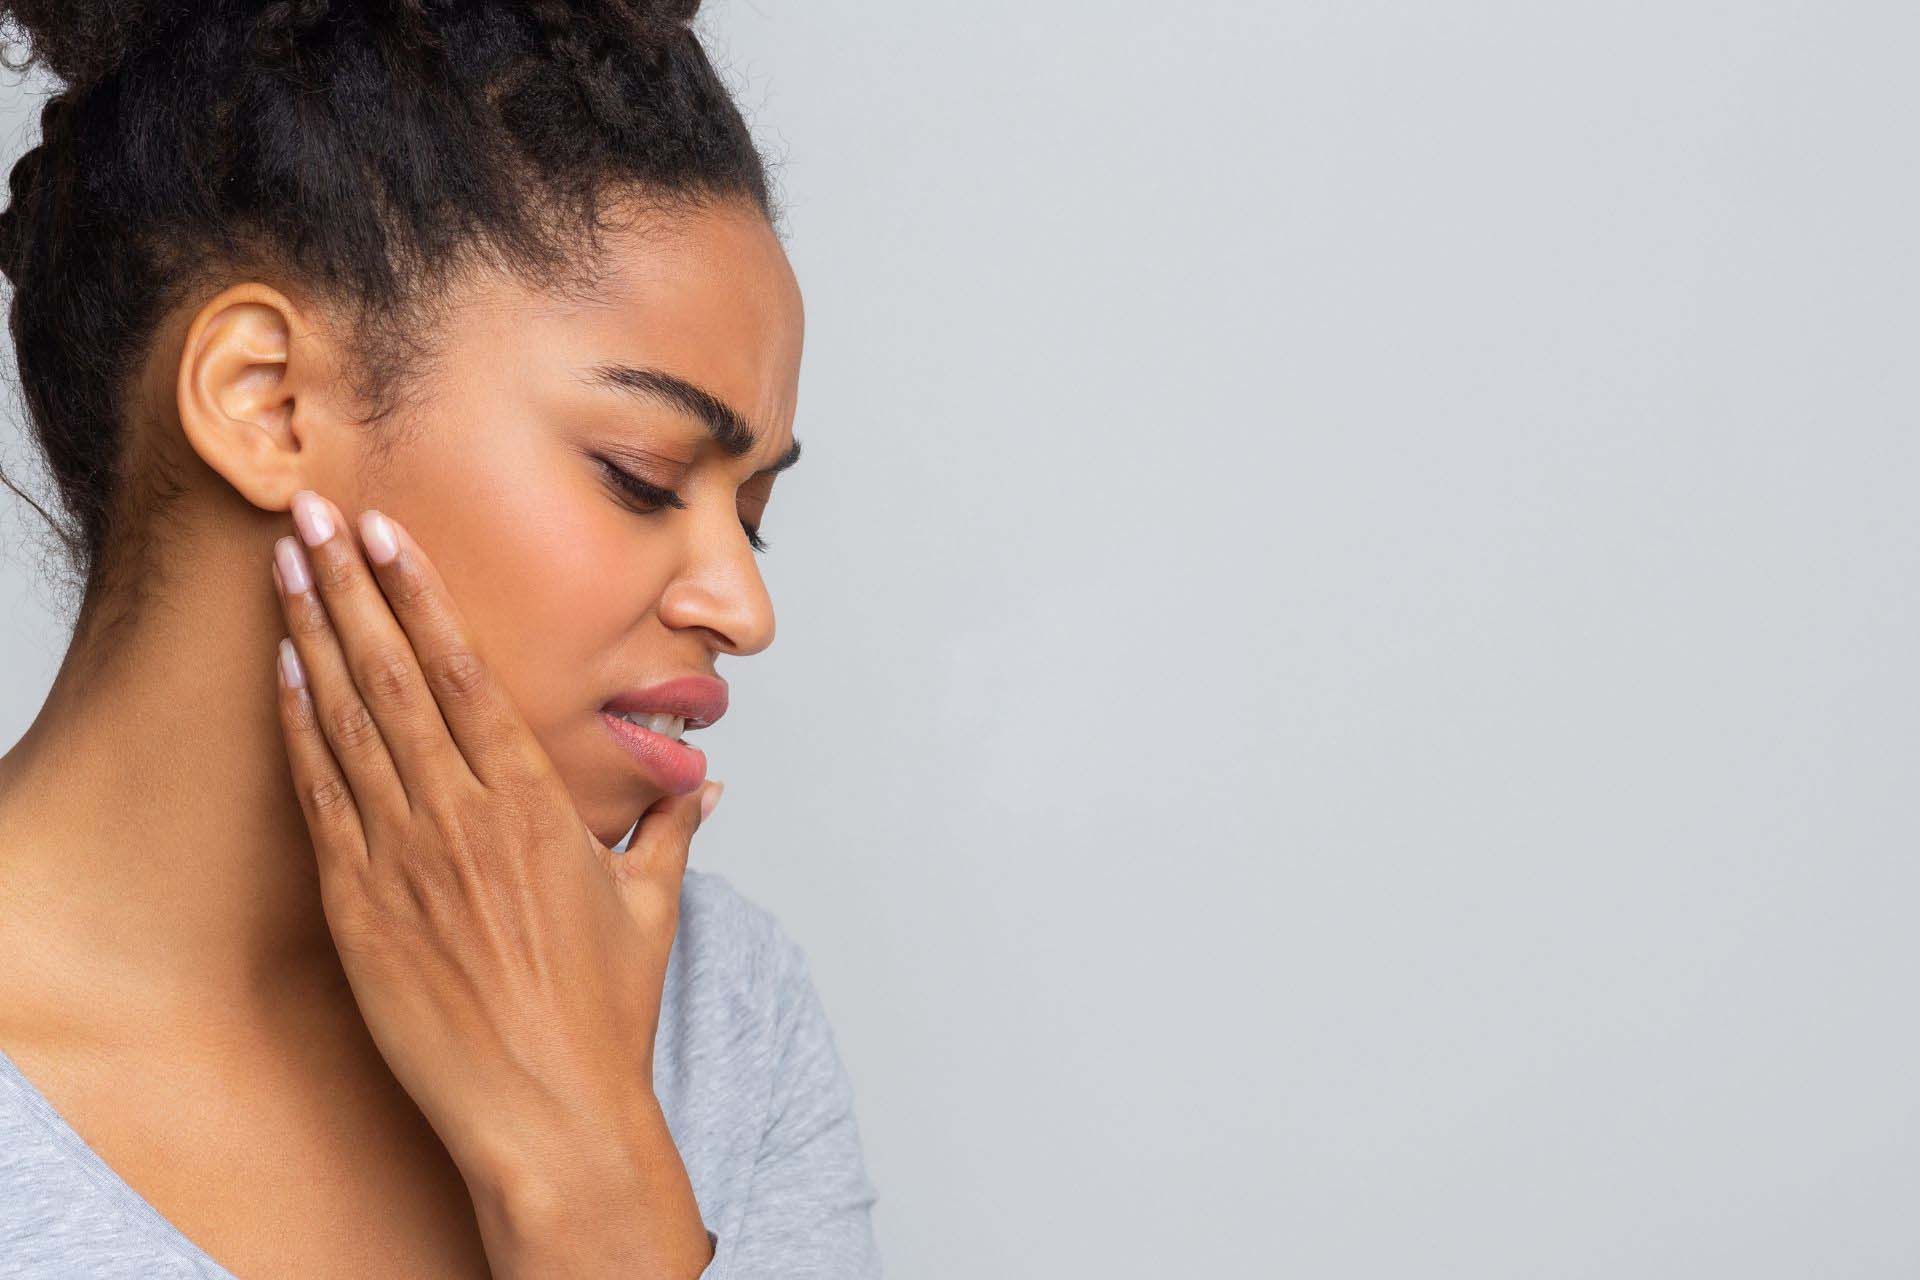 Woman holding jaw due to joint pain by her ears as she sees a TMJ specialist, Dr. Hakim near Holmby Hills, Los Angeles, who is treating TMJ for her.